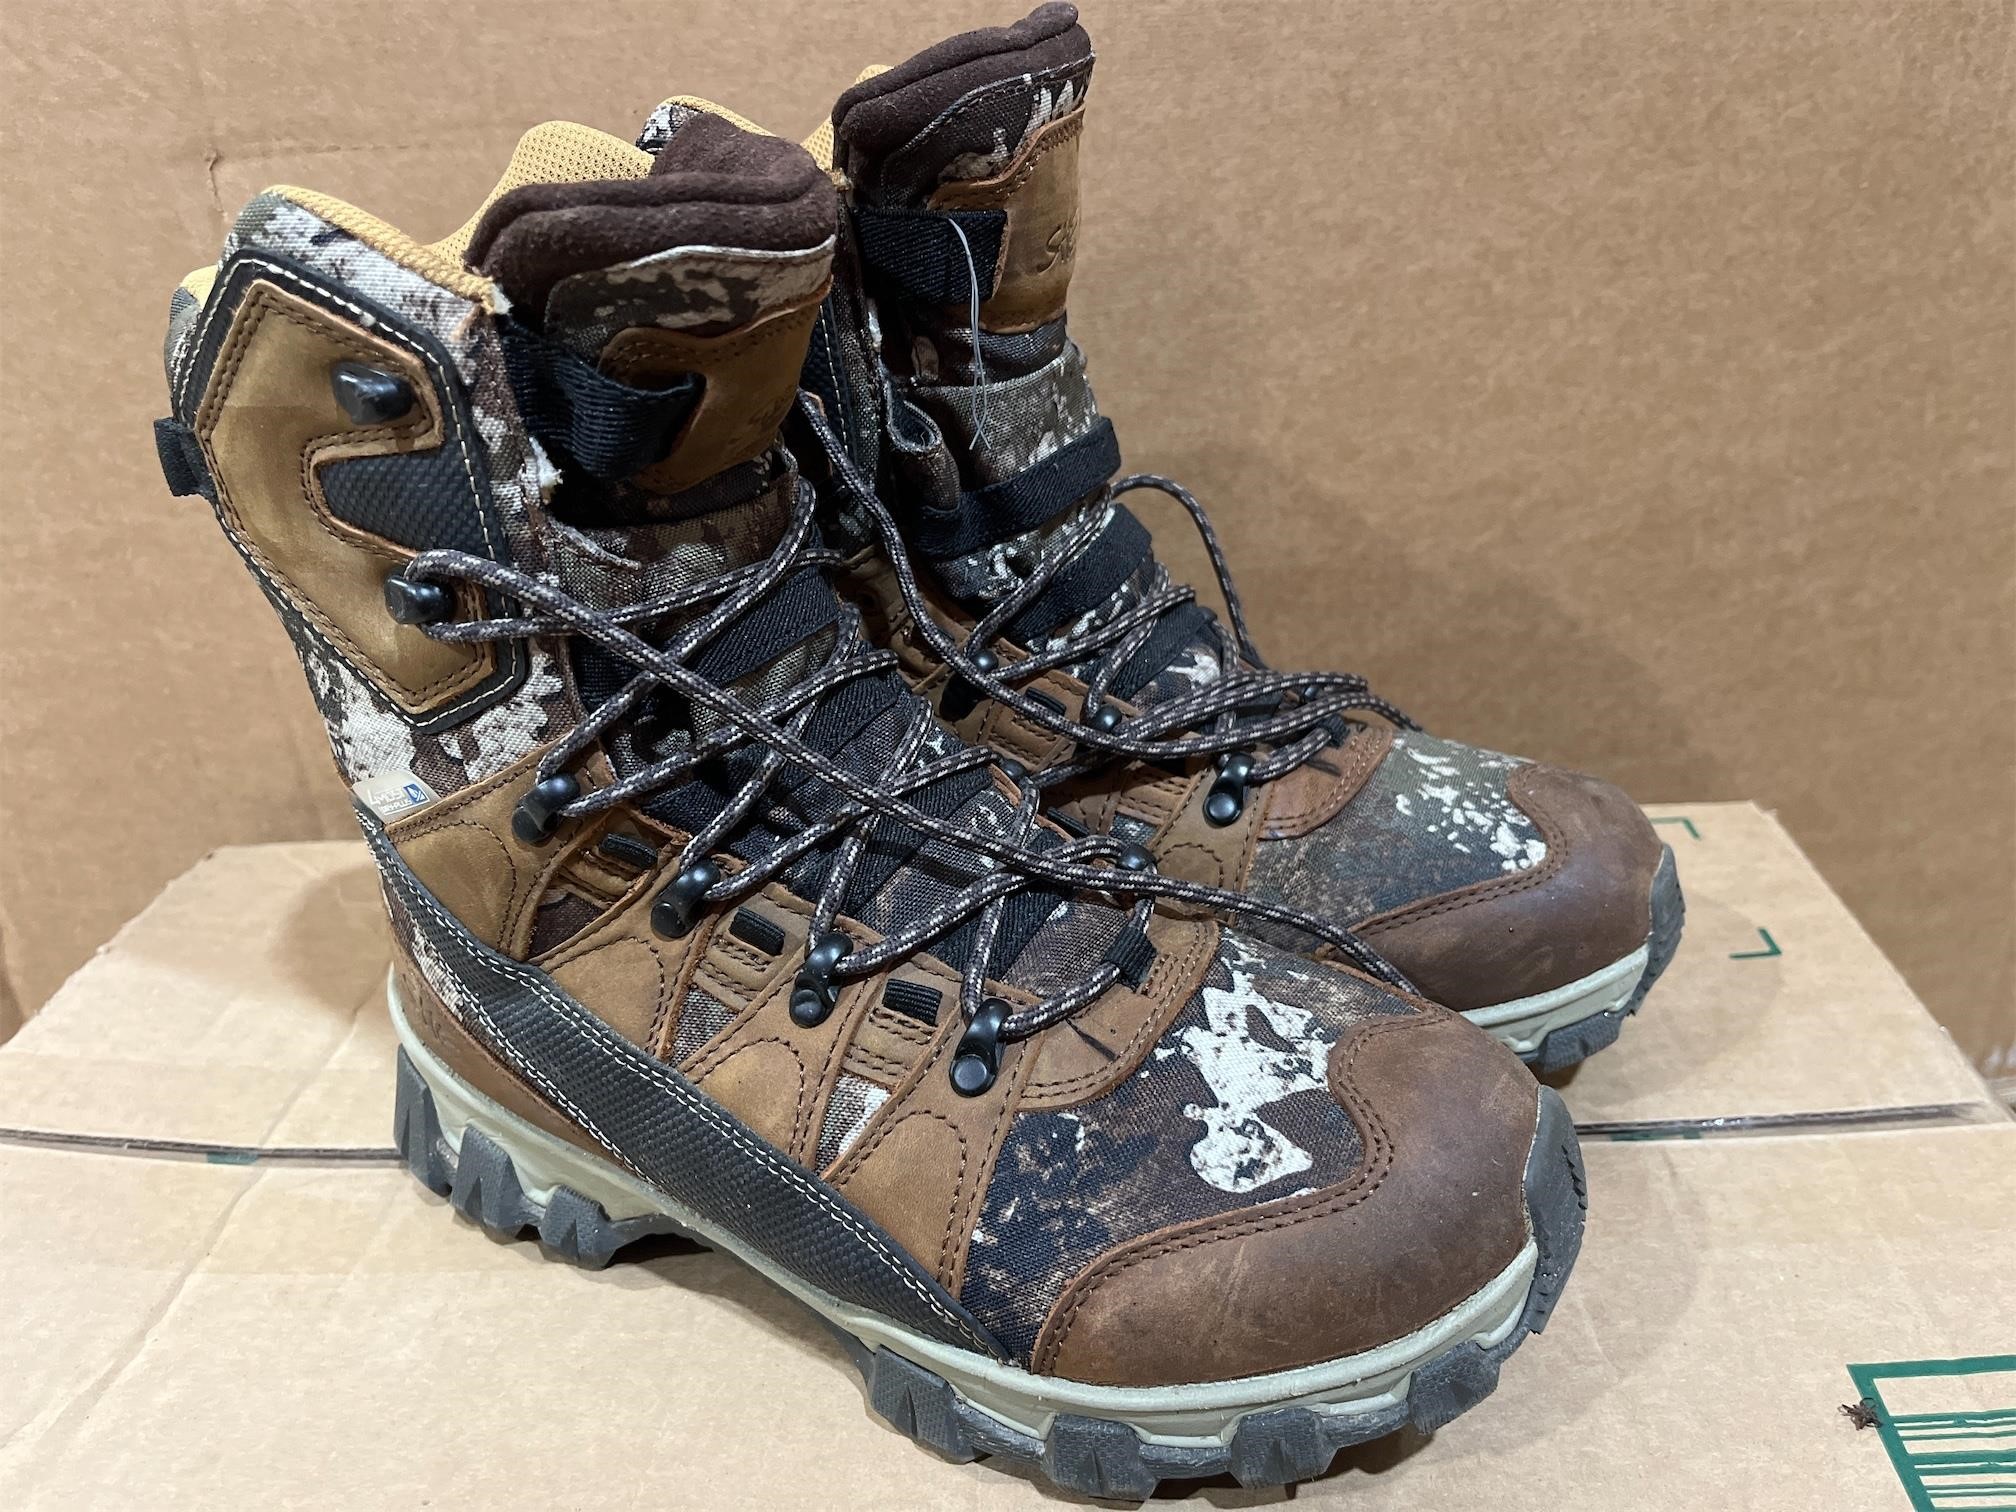 SHE Hunting boots size 8.5